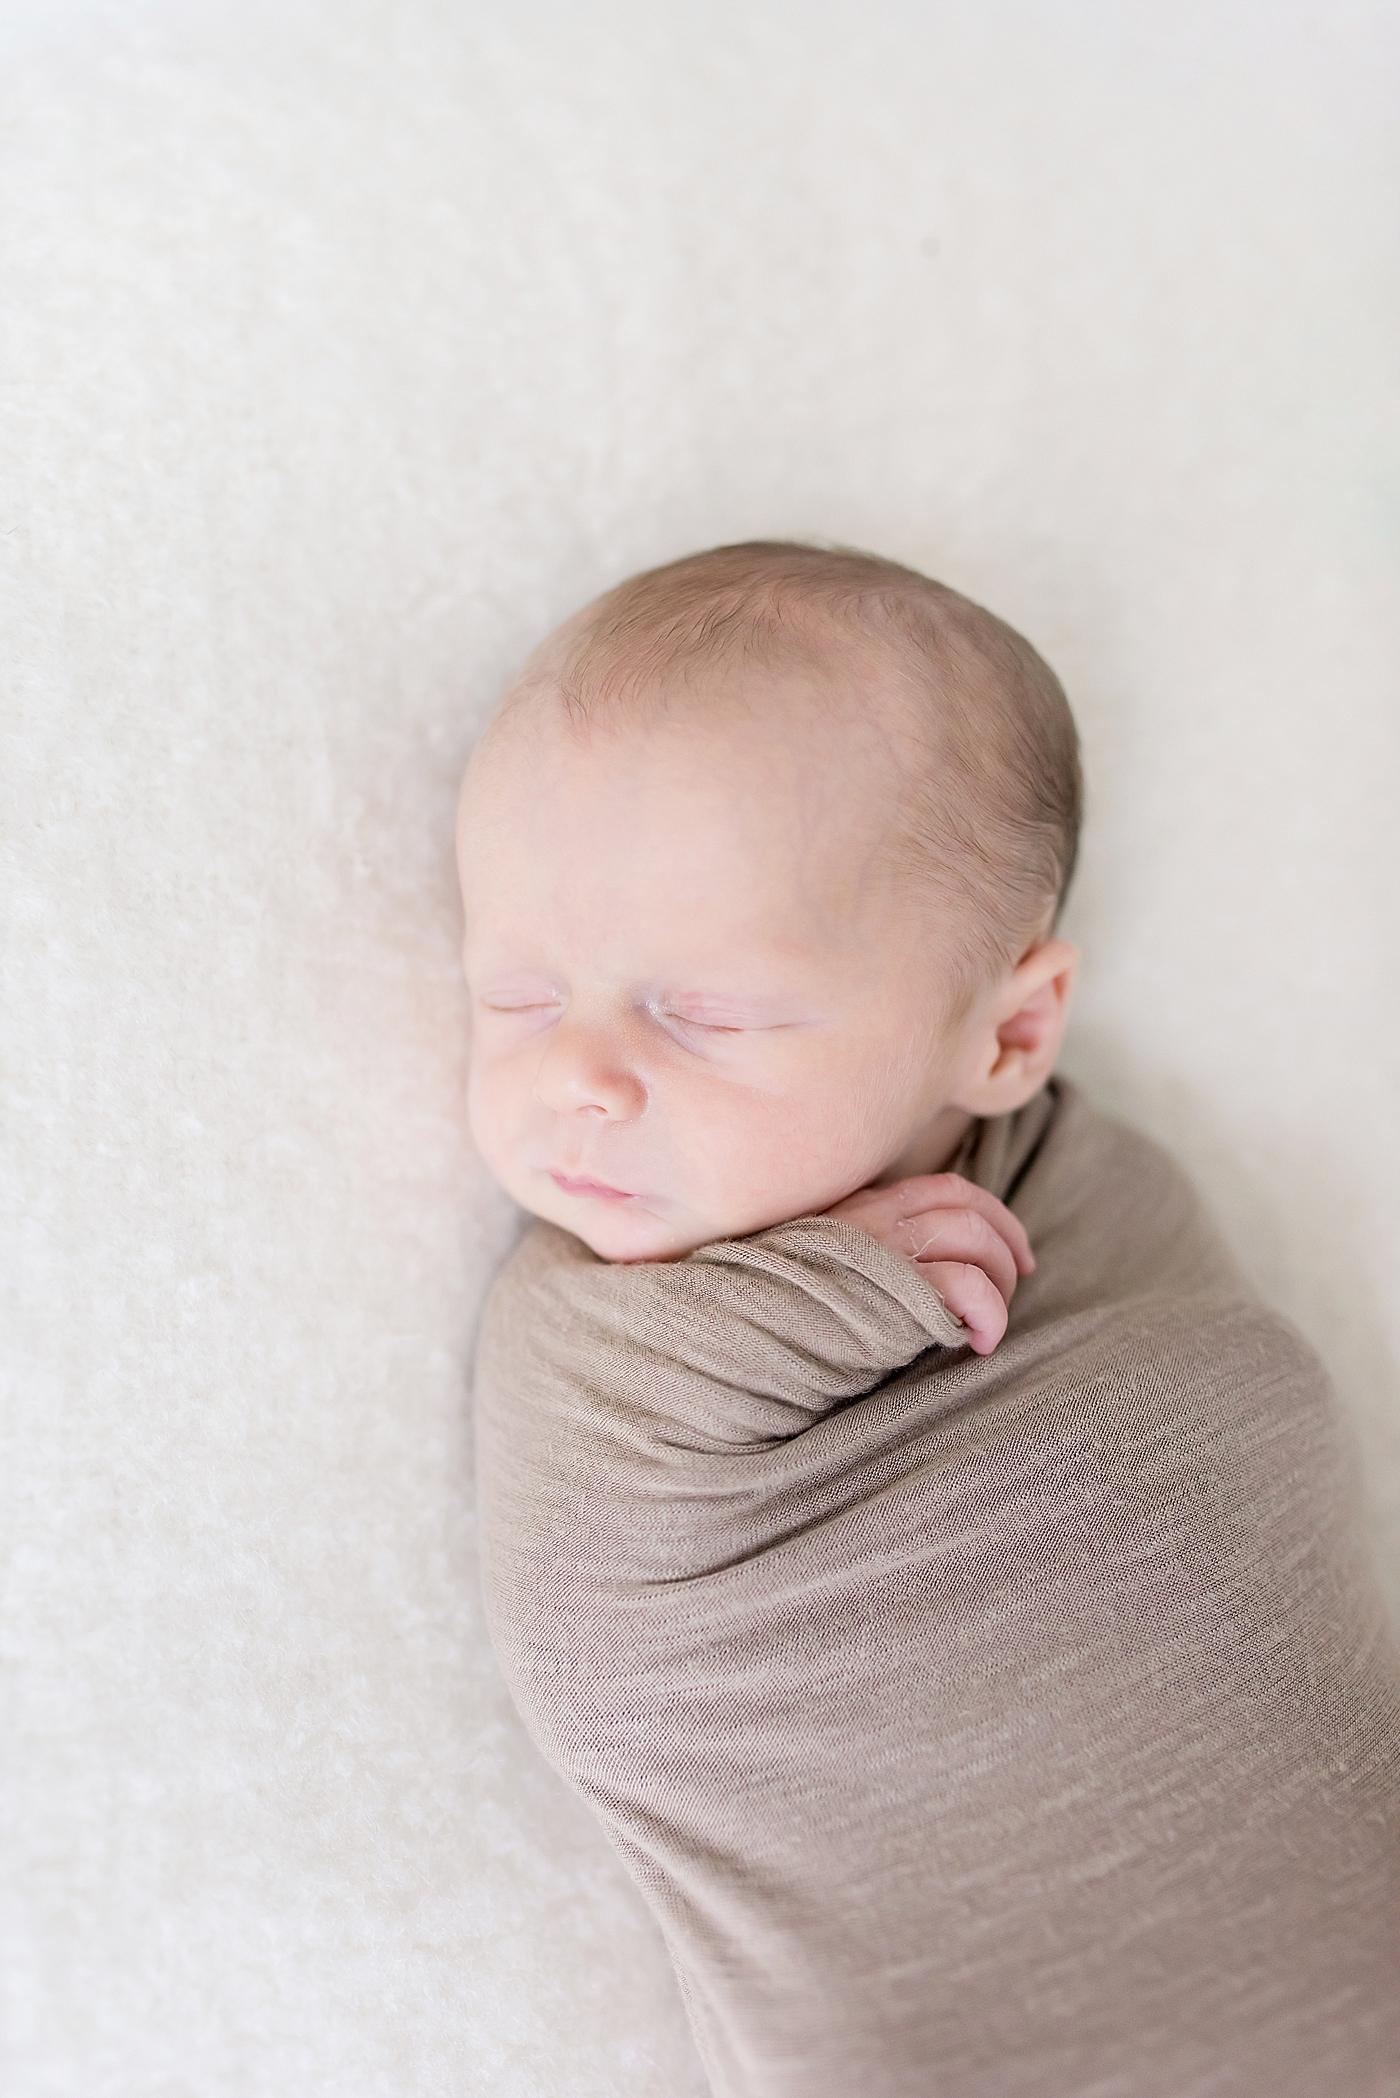 Baby boy sleeping wrapped in a swaddle | Photo by Charlotte NC Newborn Photographer Anna Wisjo